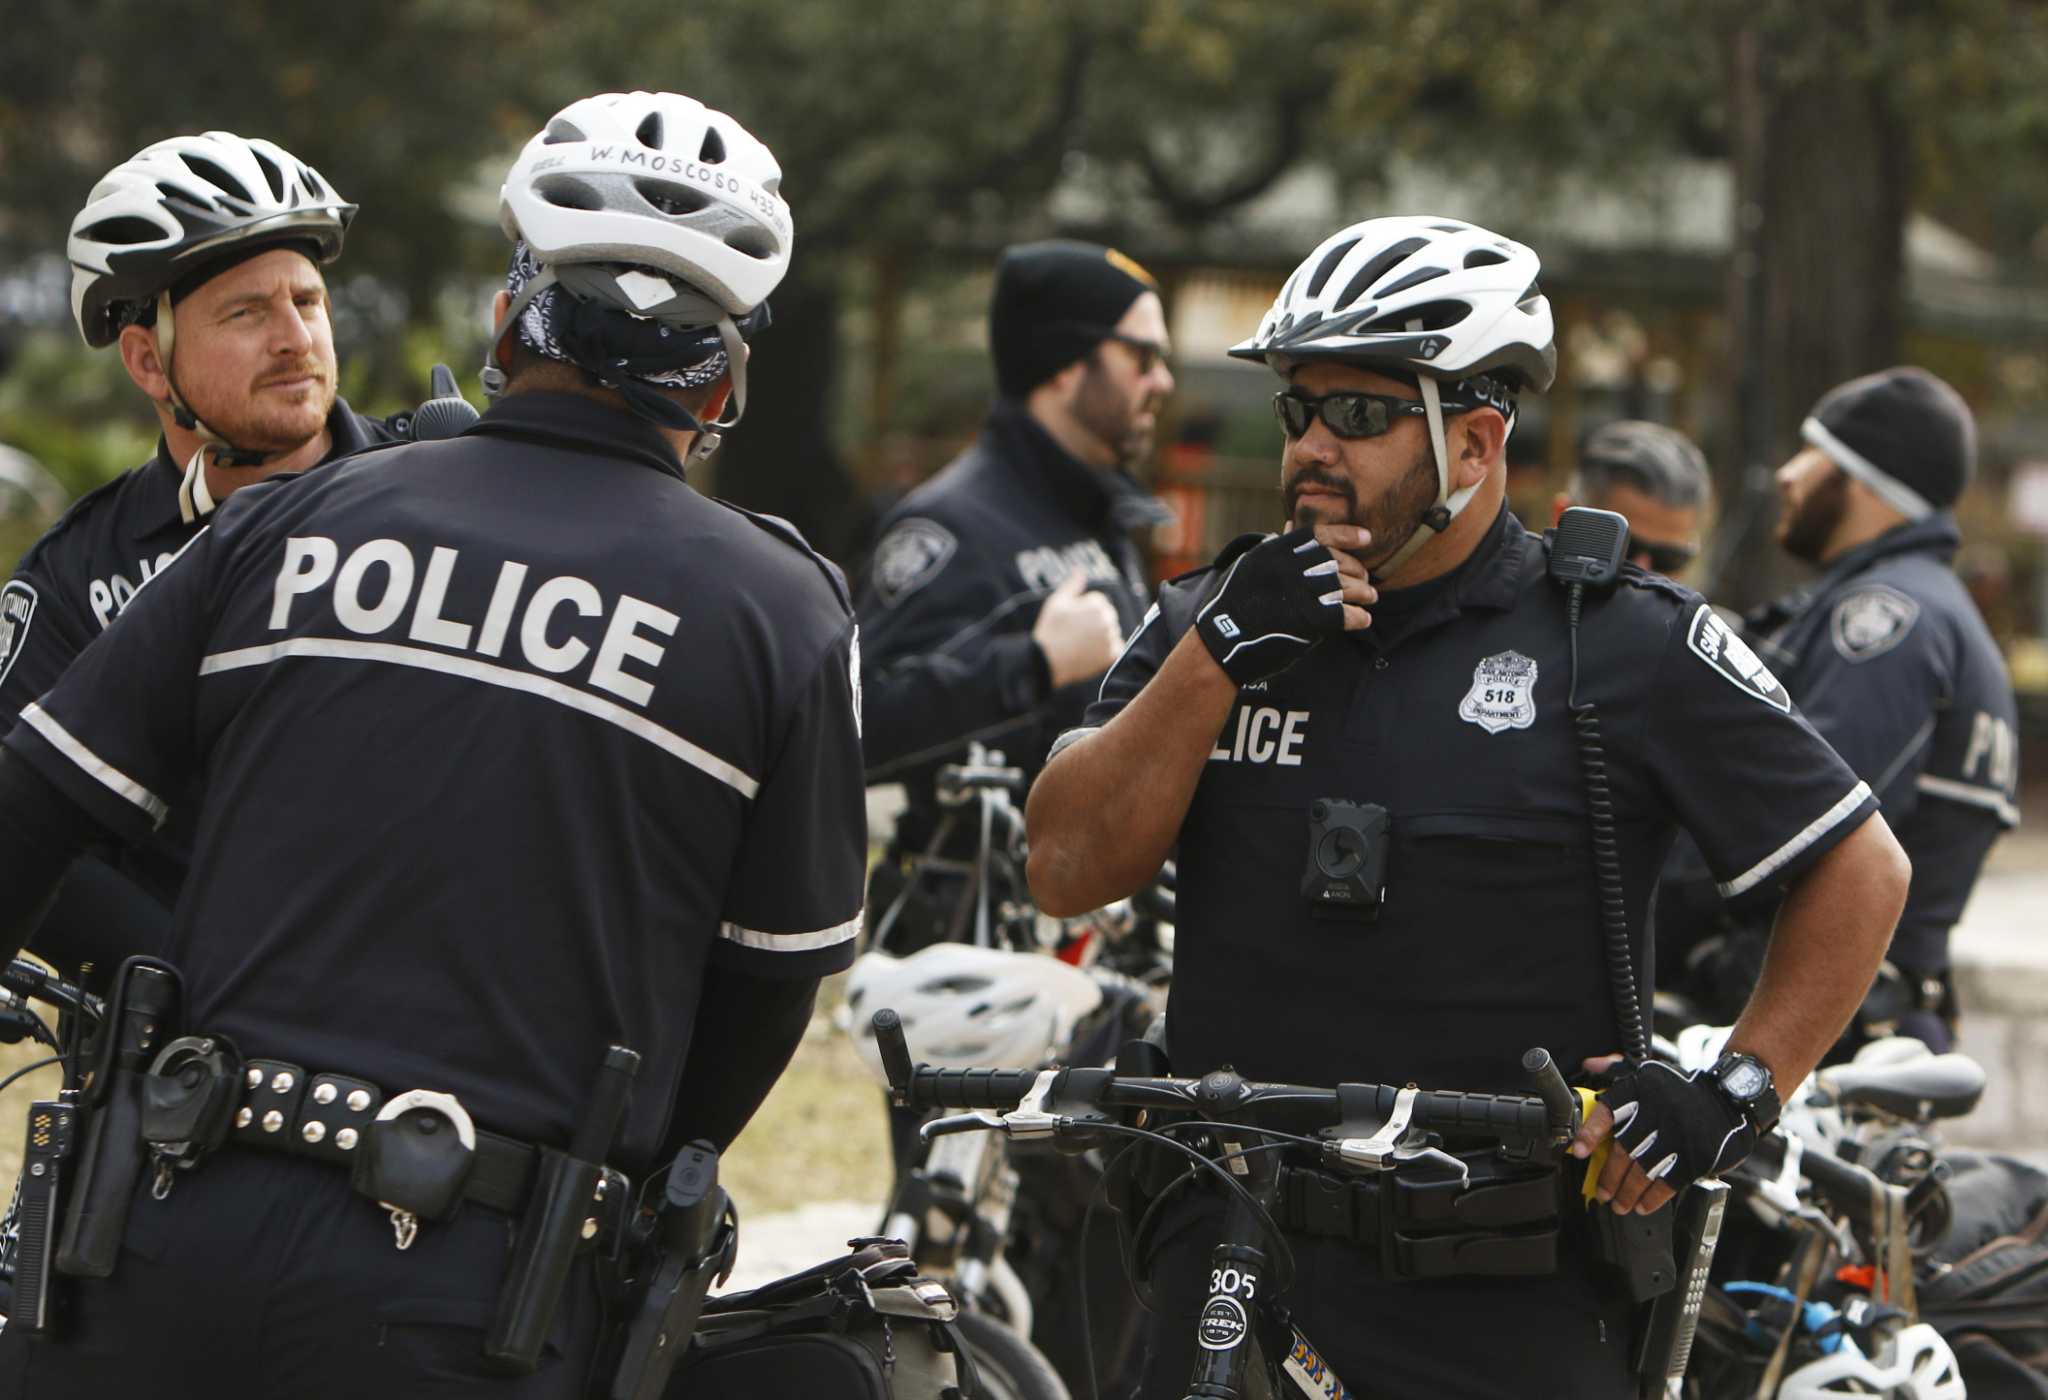 It's been two years since SAPD started using body cameras. Are they